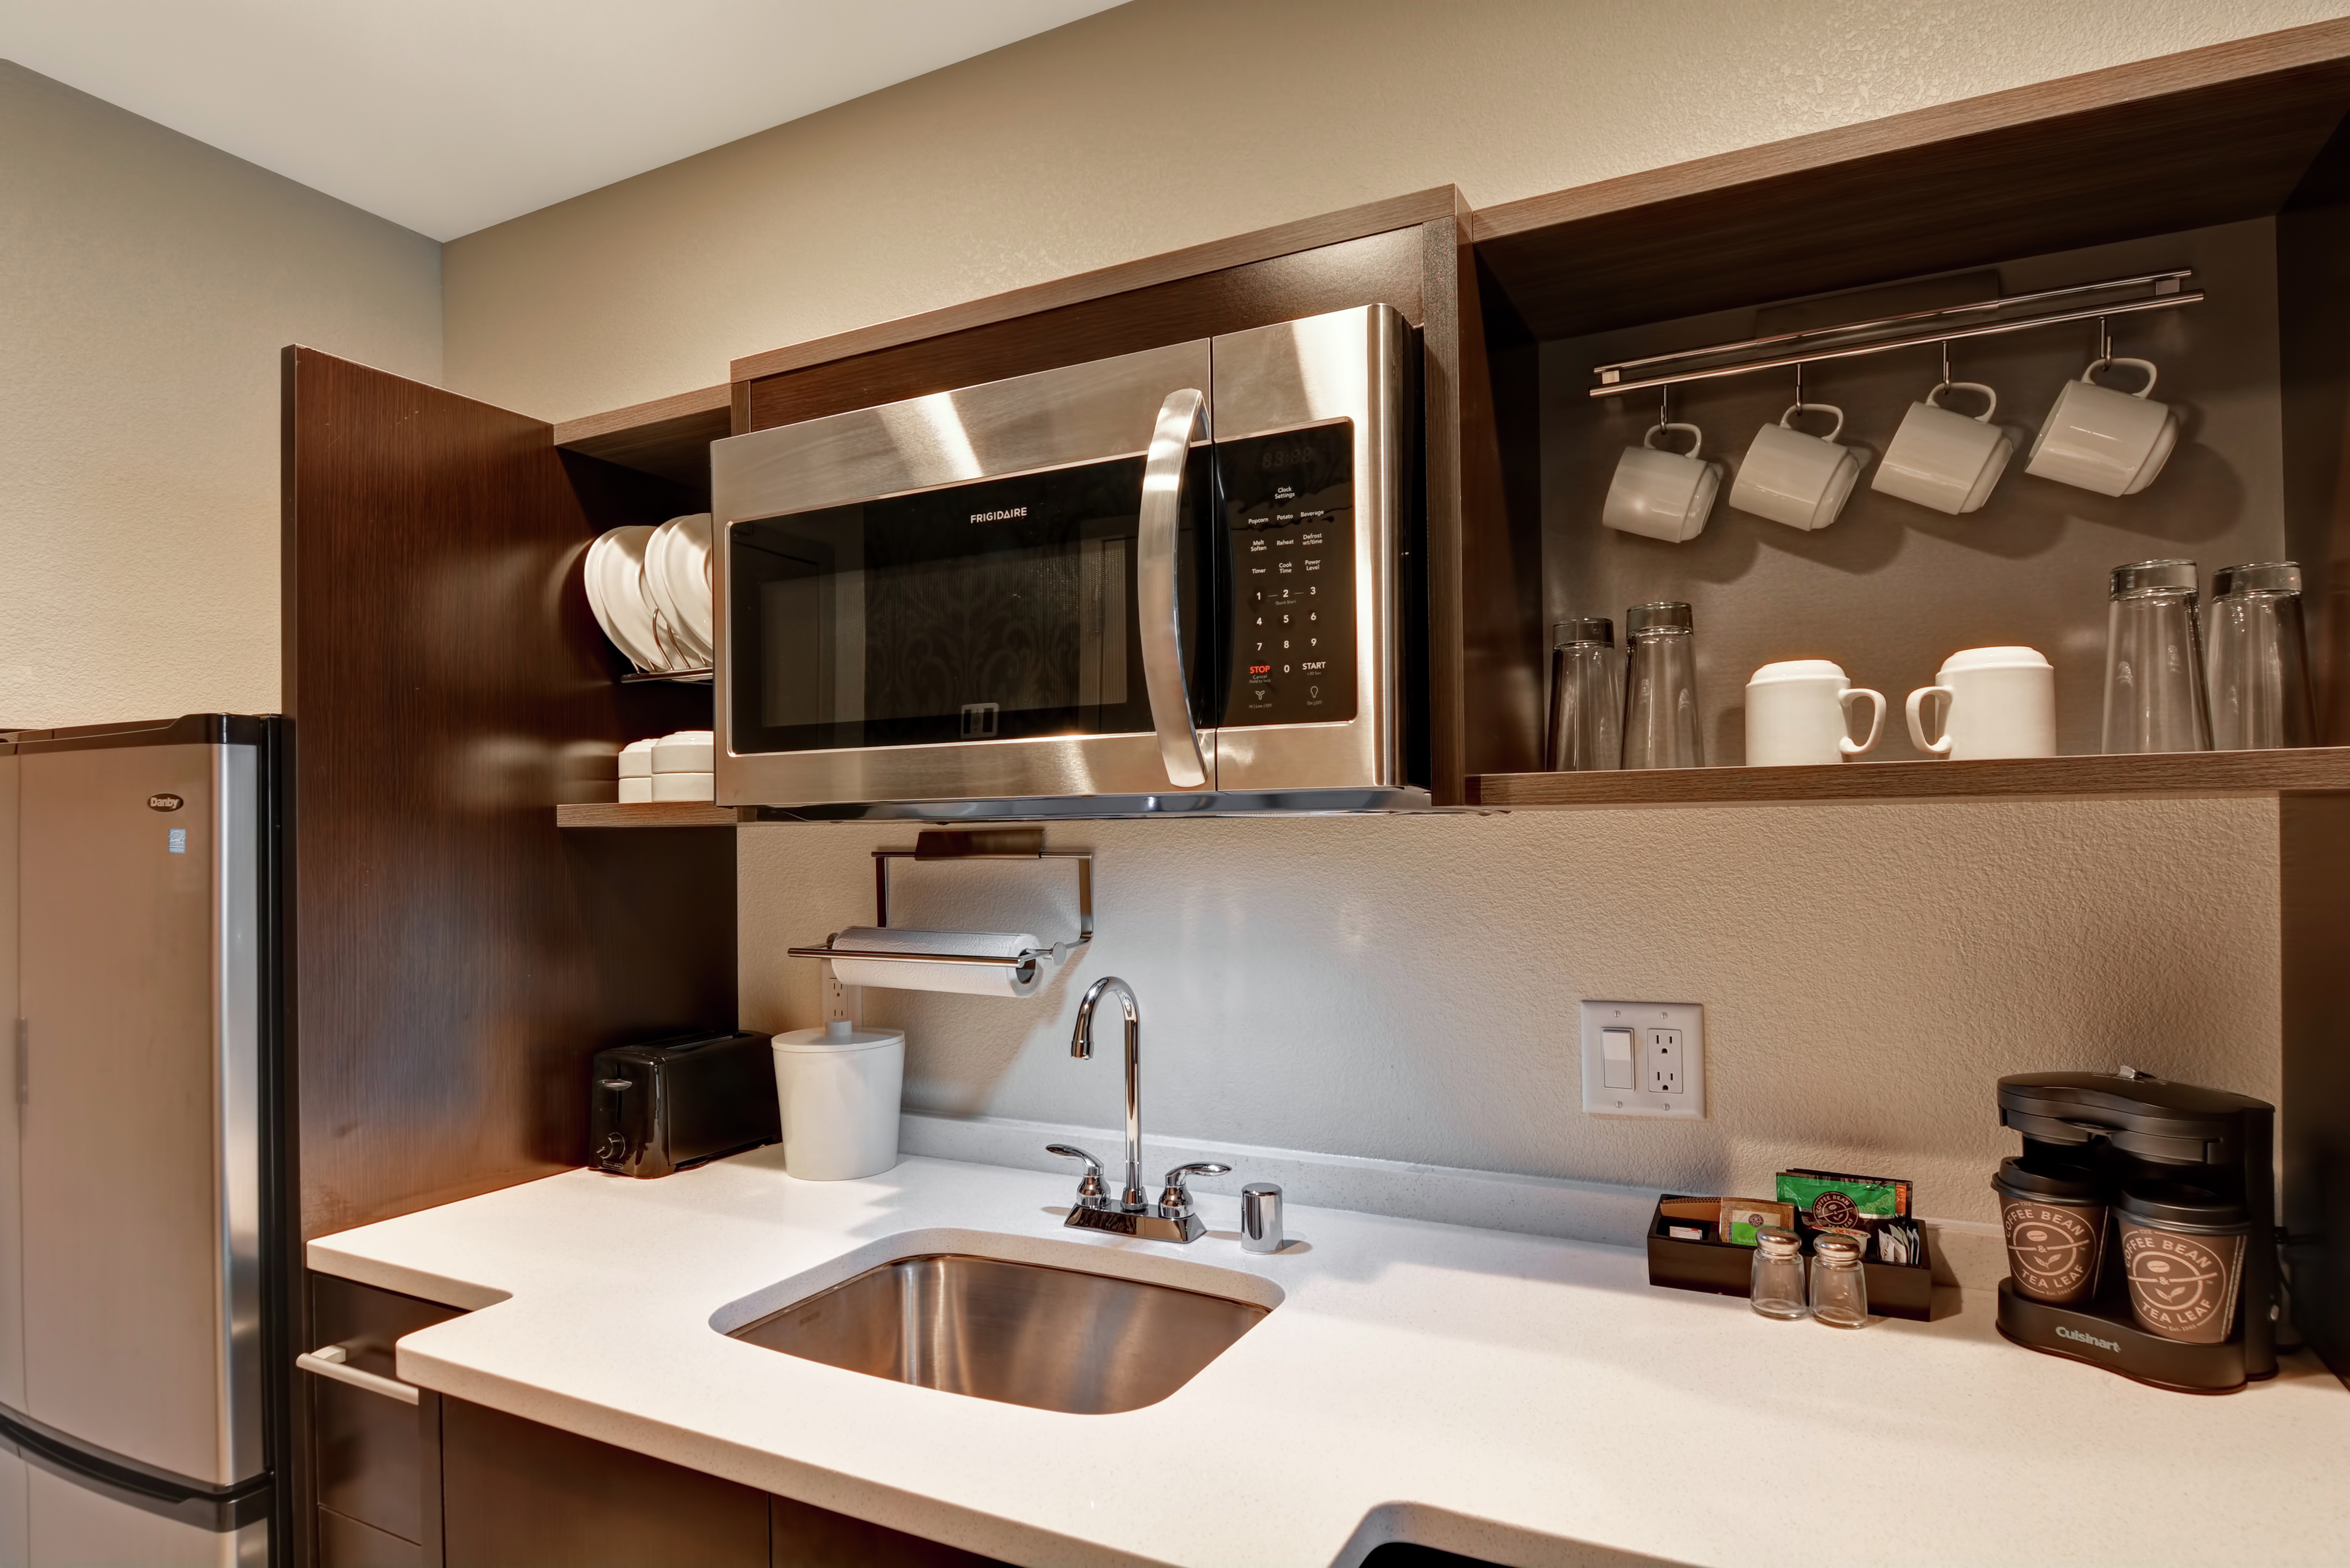 Suite Kitchen with Fridge, Microwave, Dishwasher and Sink